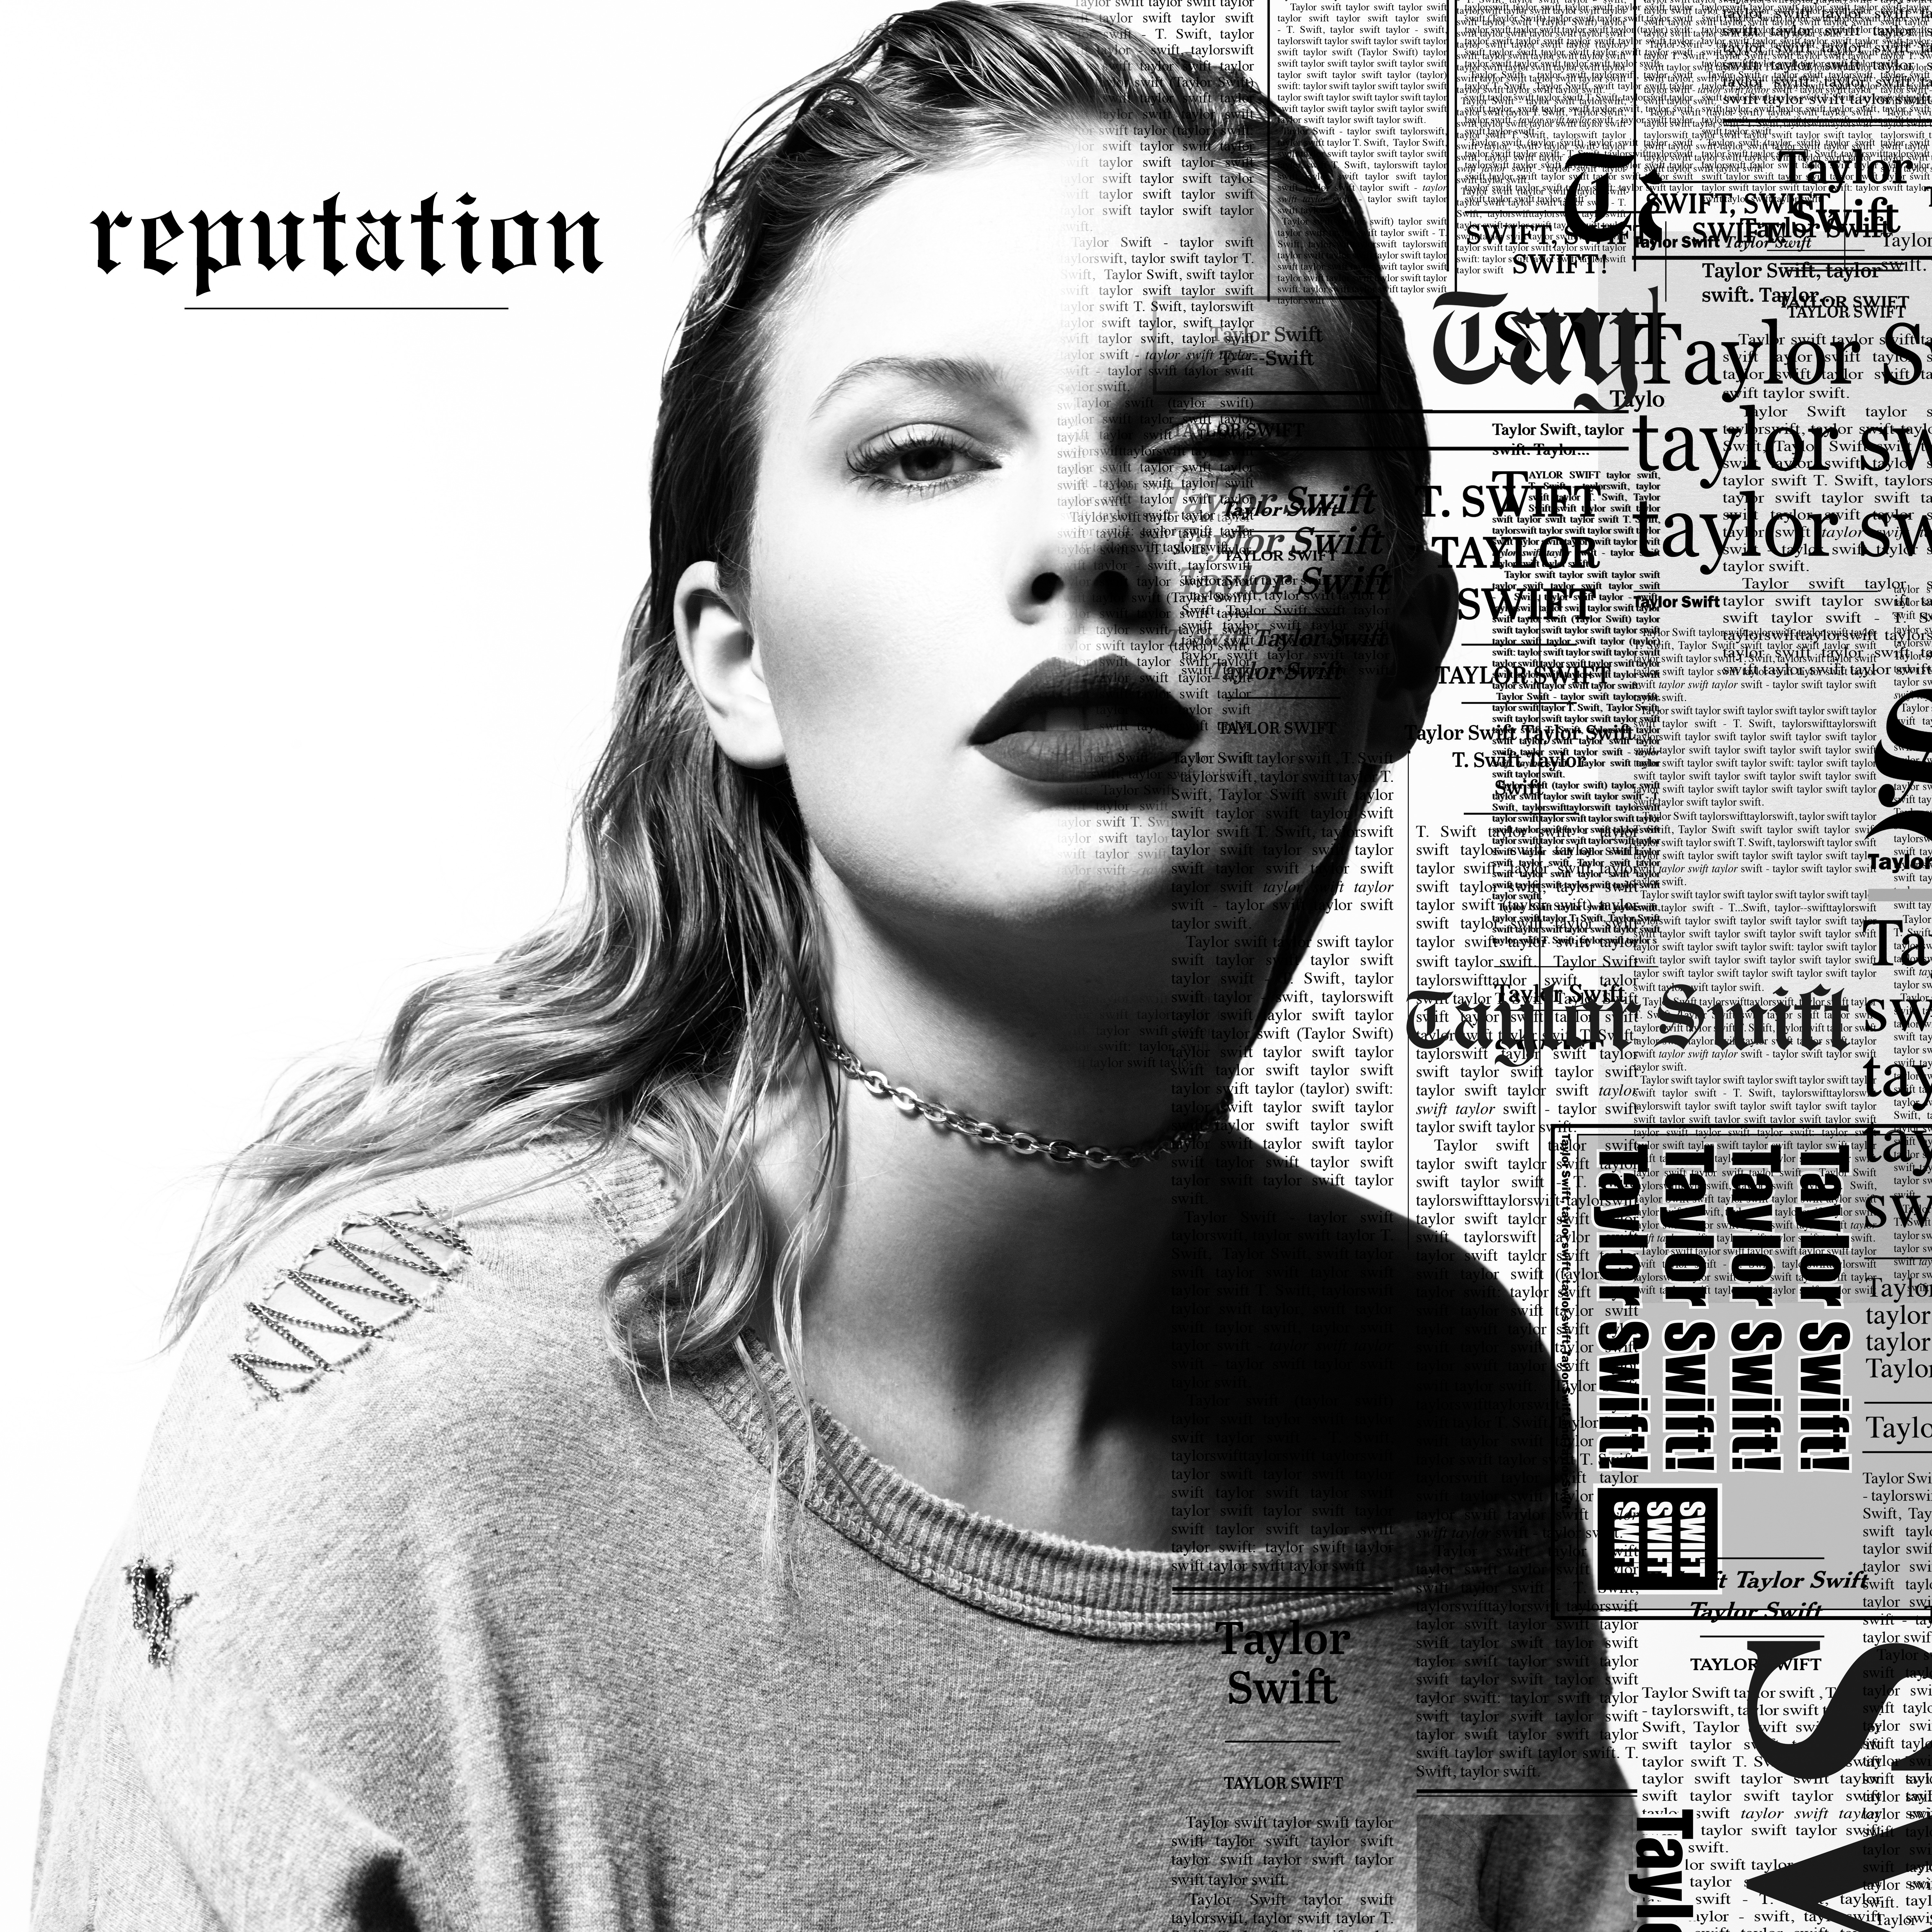 Long Live (Taylor Swift song) - Wikipedia